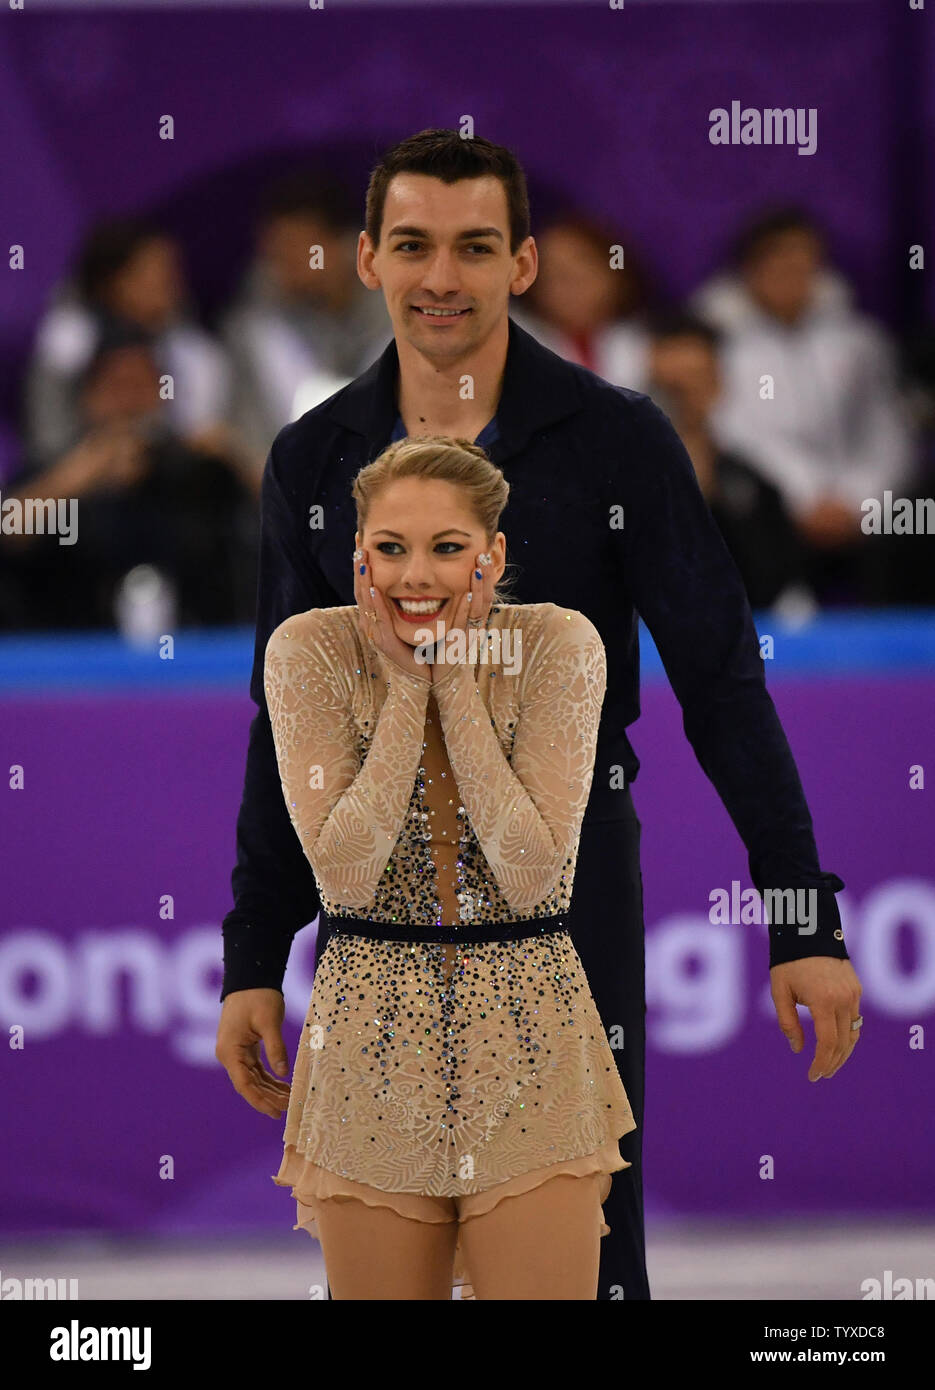 Figure skaters Alexa Scimeca Knierim and Chris Knierim of the USA react  after their set in Pair Skating Short Program during the 2018 Pyeongchang  Winter Olympics at the Gangneung Ice Arena in